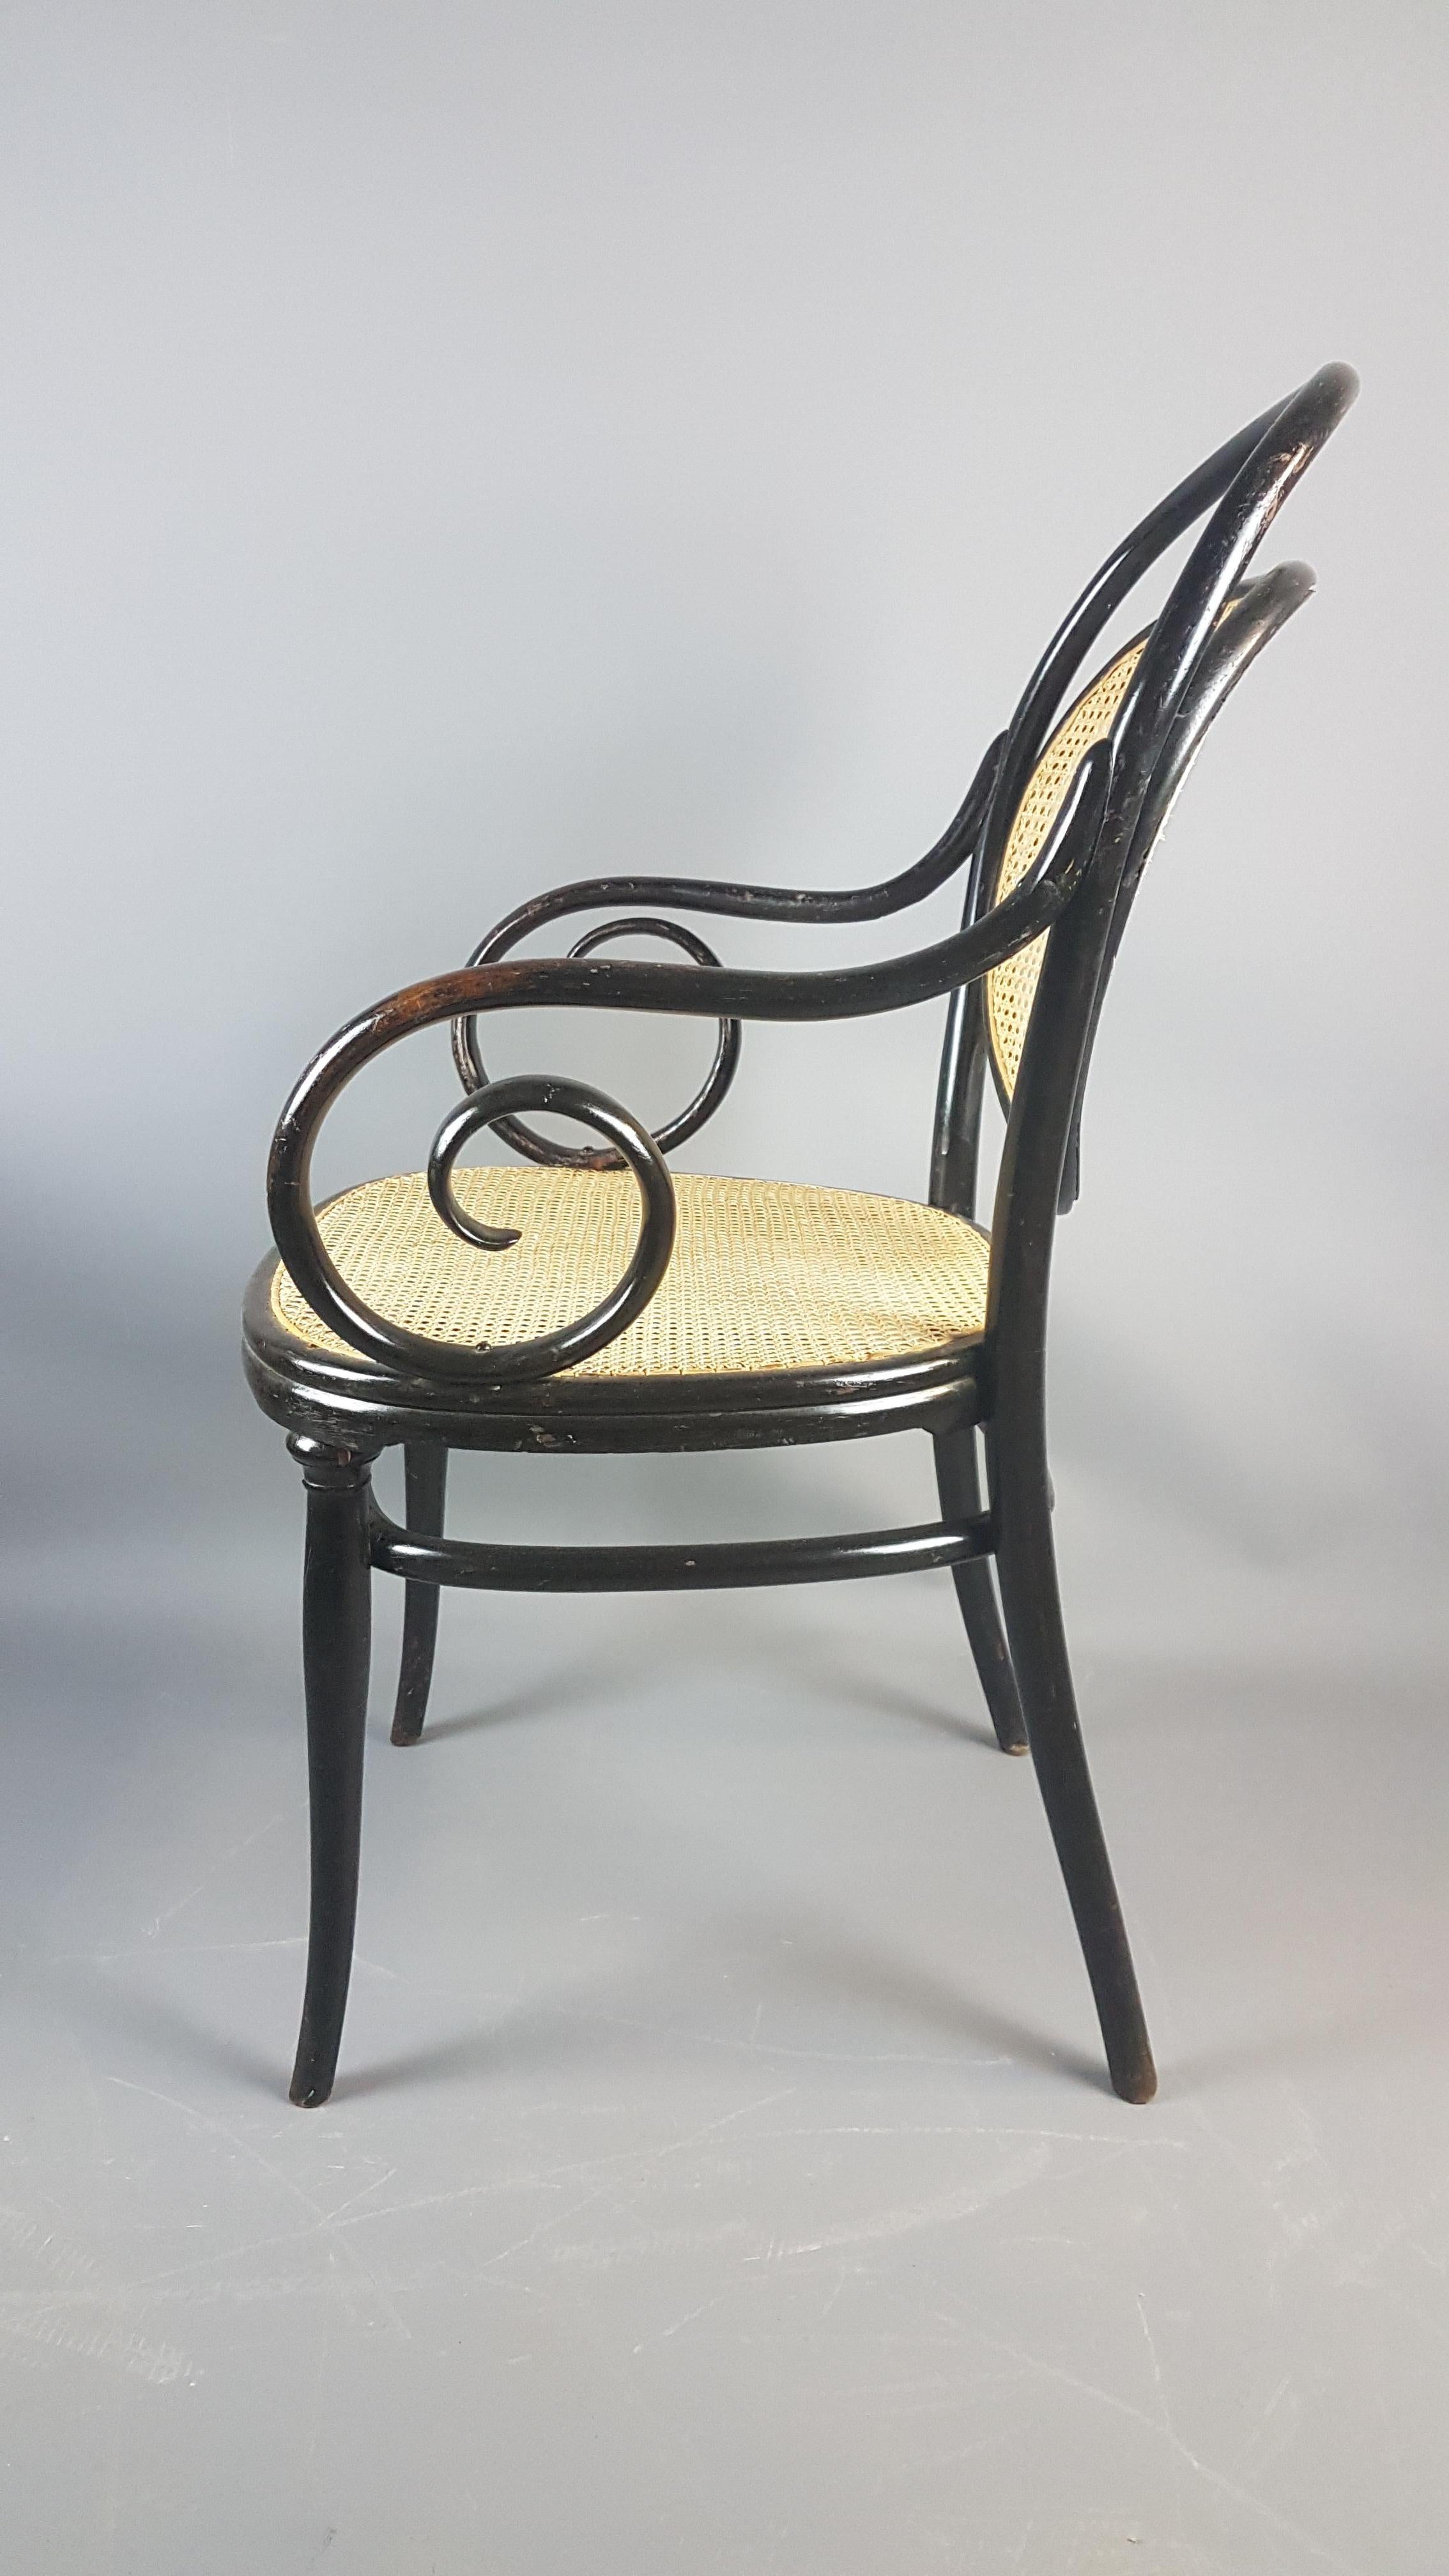 Very nice Thonet No.3 bentwood armchair circa 1860. A very elegant design of chair that fits into any traditional setting but looks just as at home in a contemporary setting or utilized as an item of furniture sculpture. The cane seat and back have